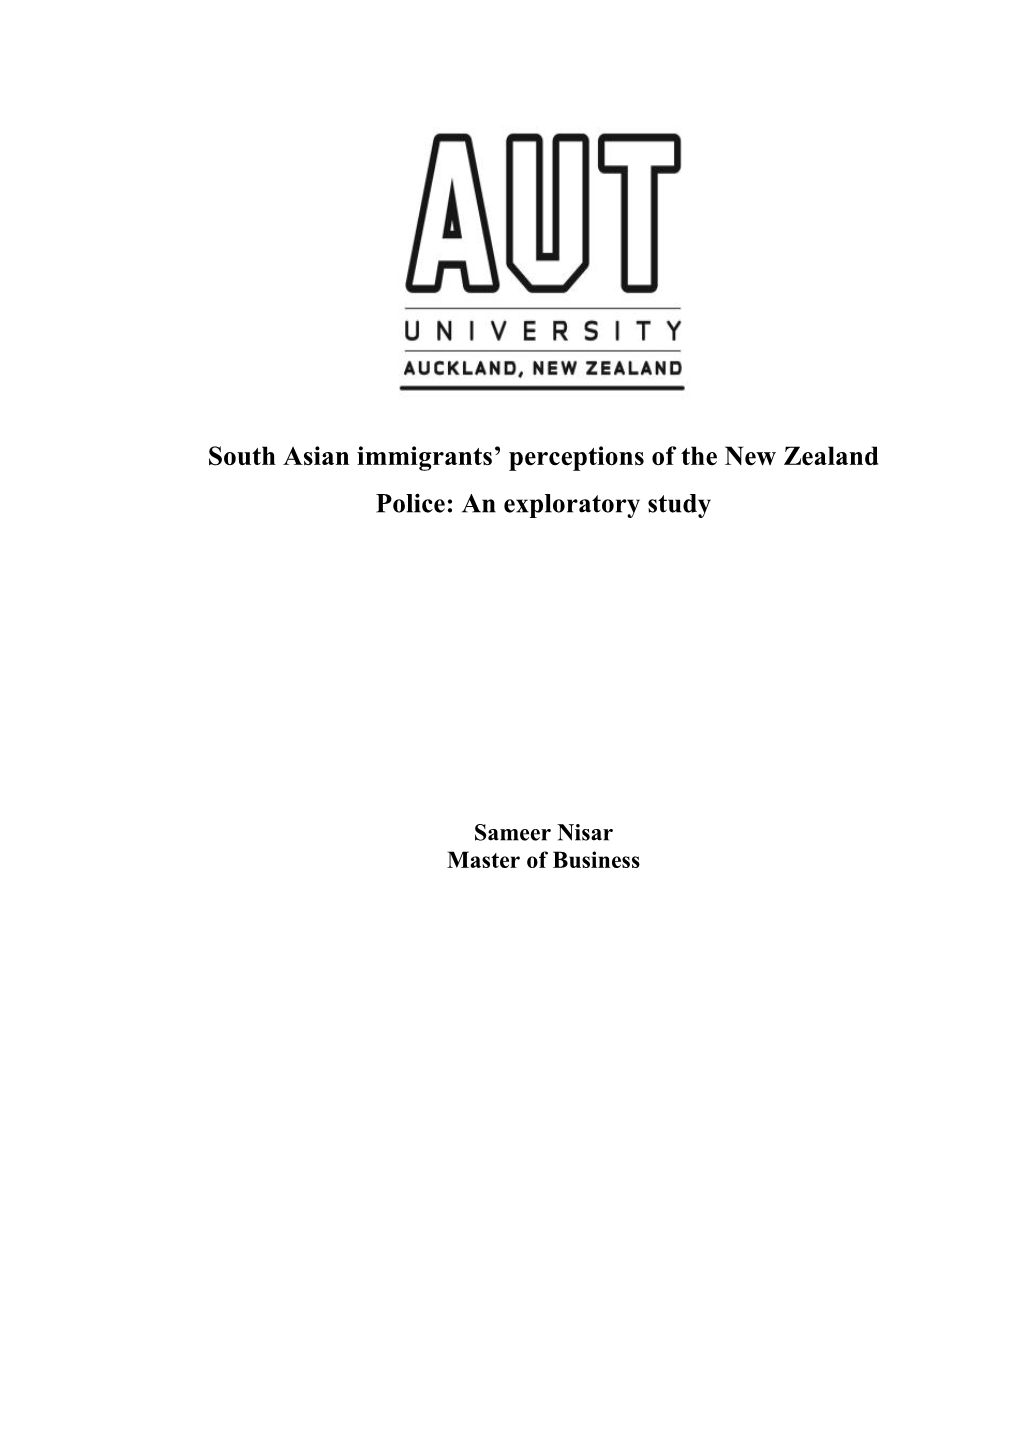 South Asian Immigrants' Perceptions of the New Zealand Police